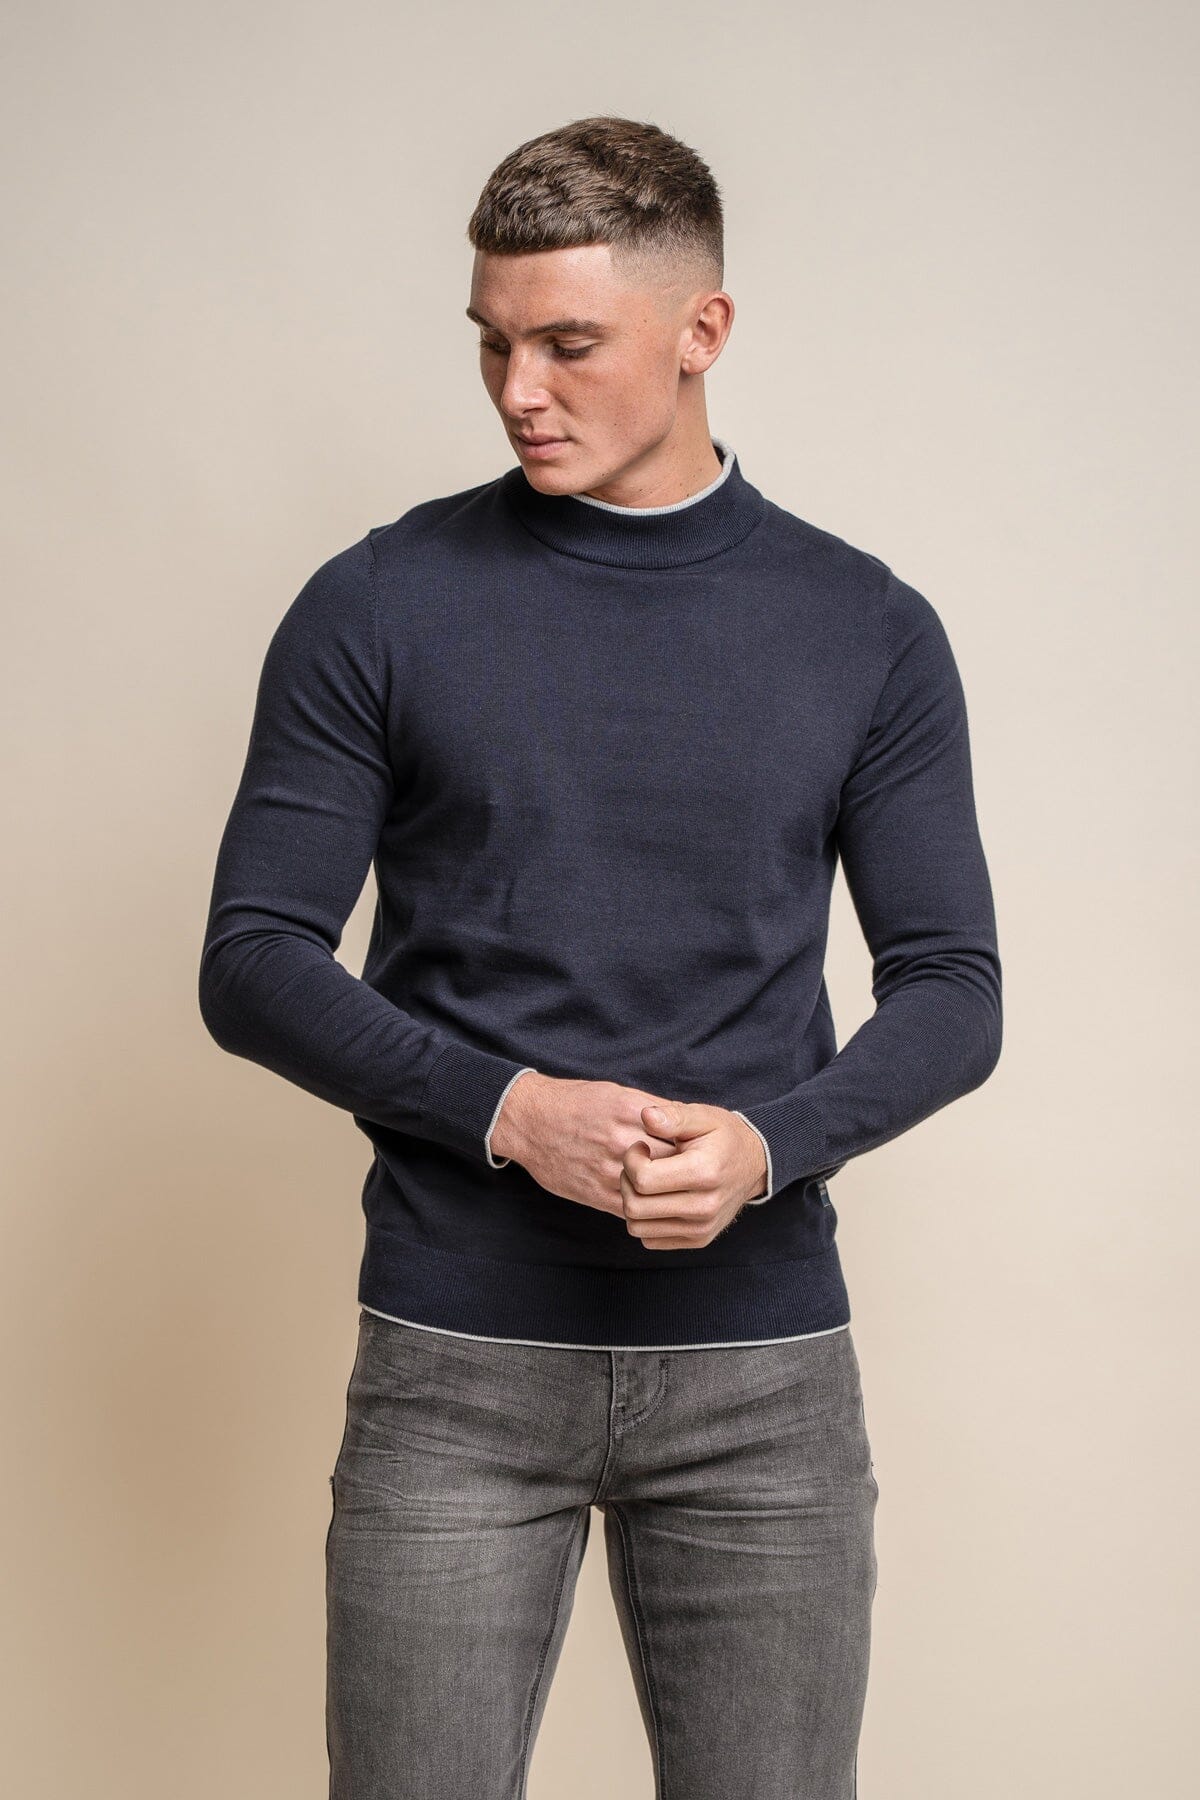 Rio Navy Turtle Neck Jumper - Jumpers - S 